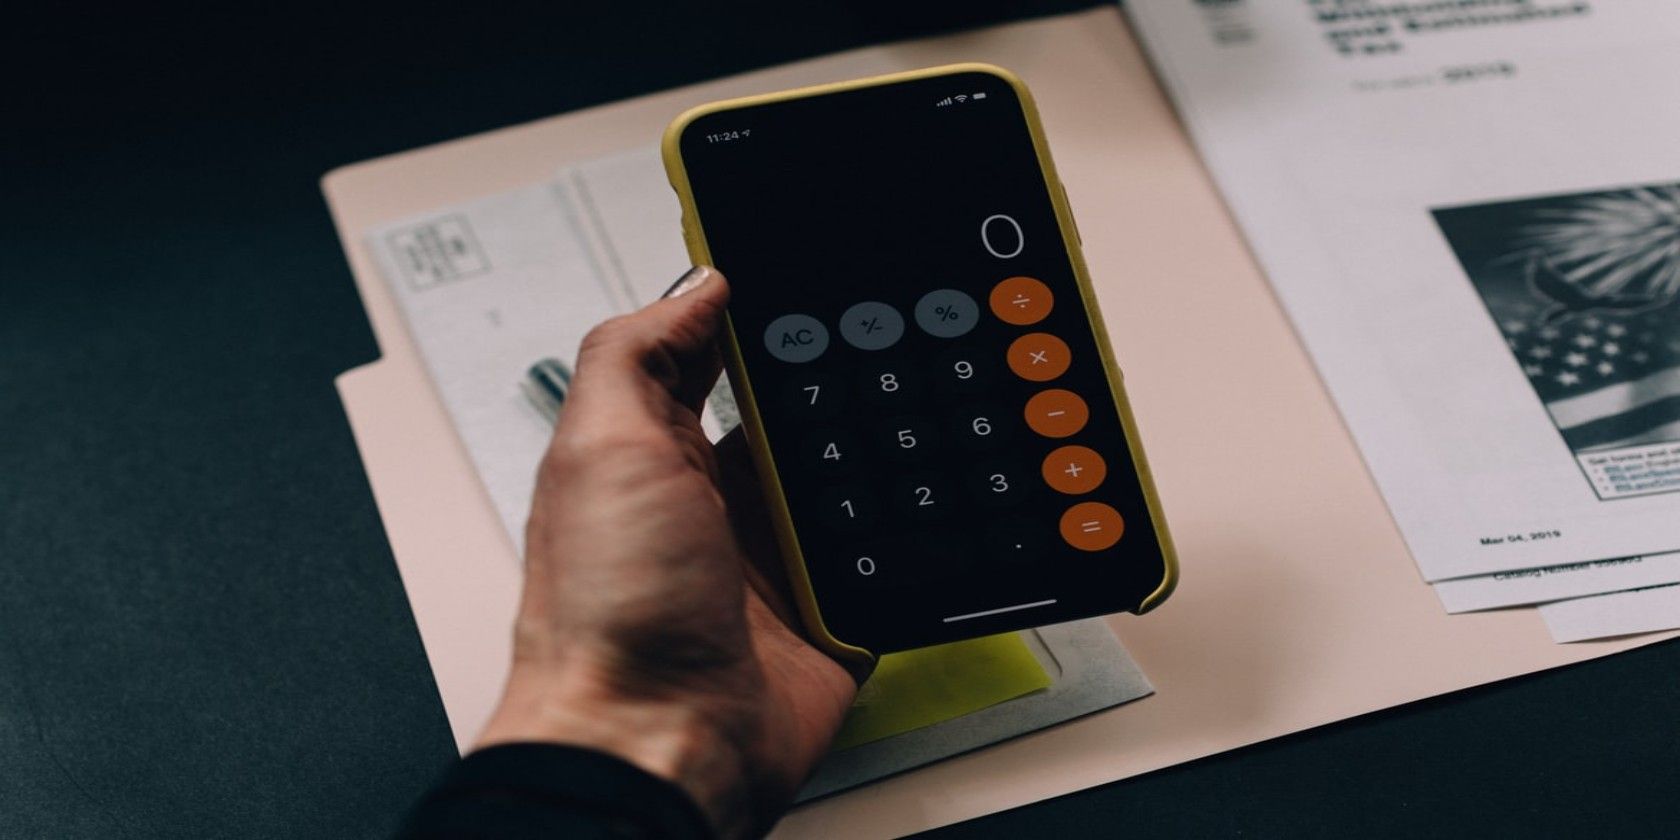 Person holding mobile using calculator app